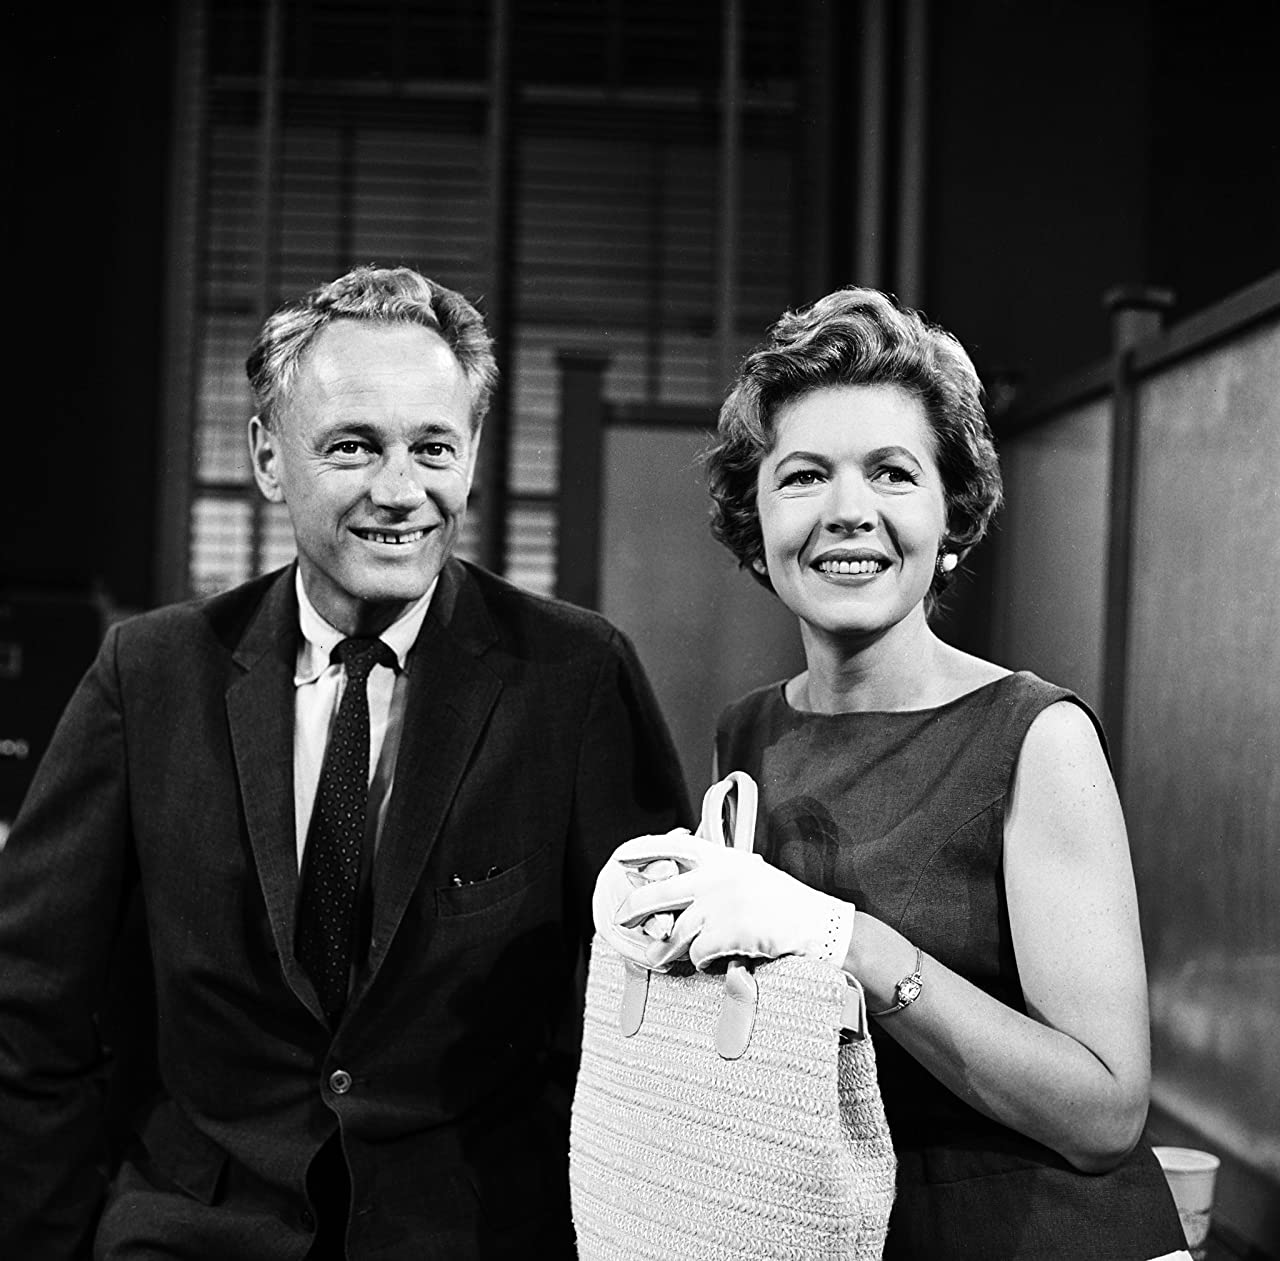 Photo of Augusta Dabney and William Prince appearing as Tracey and Jerry Malone in the Young Dr. Malone TV series in 1958. Both are well-dressed and she's wearing evening gloves and holding a purse.